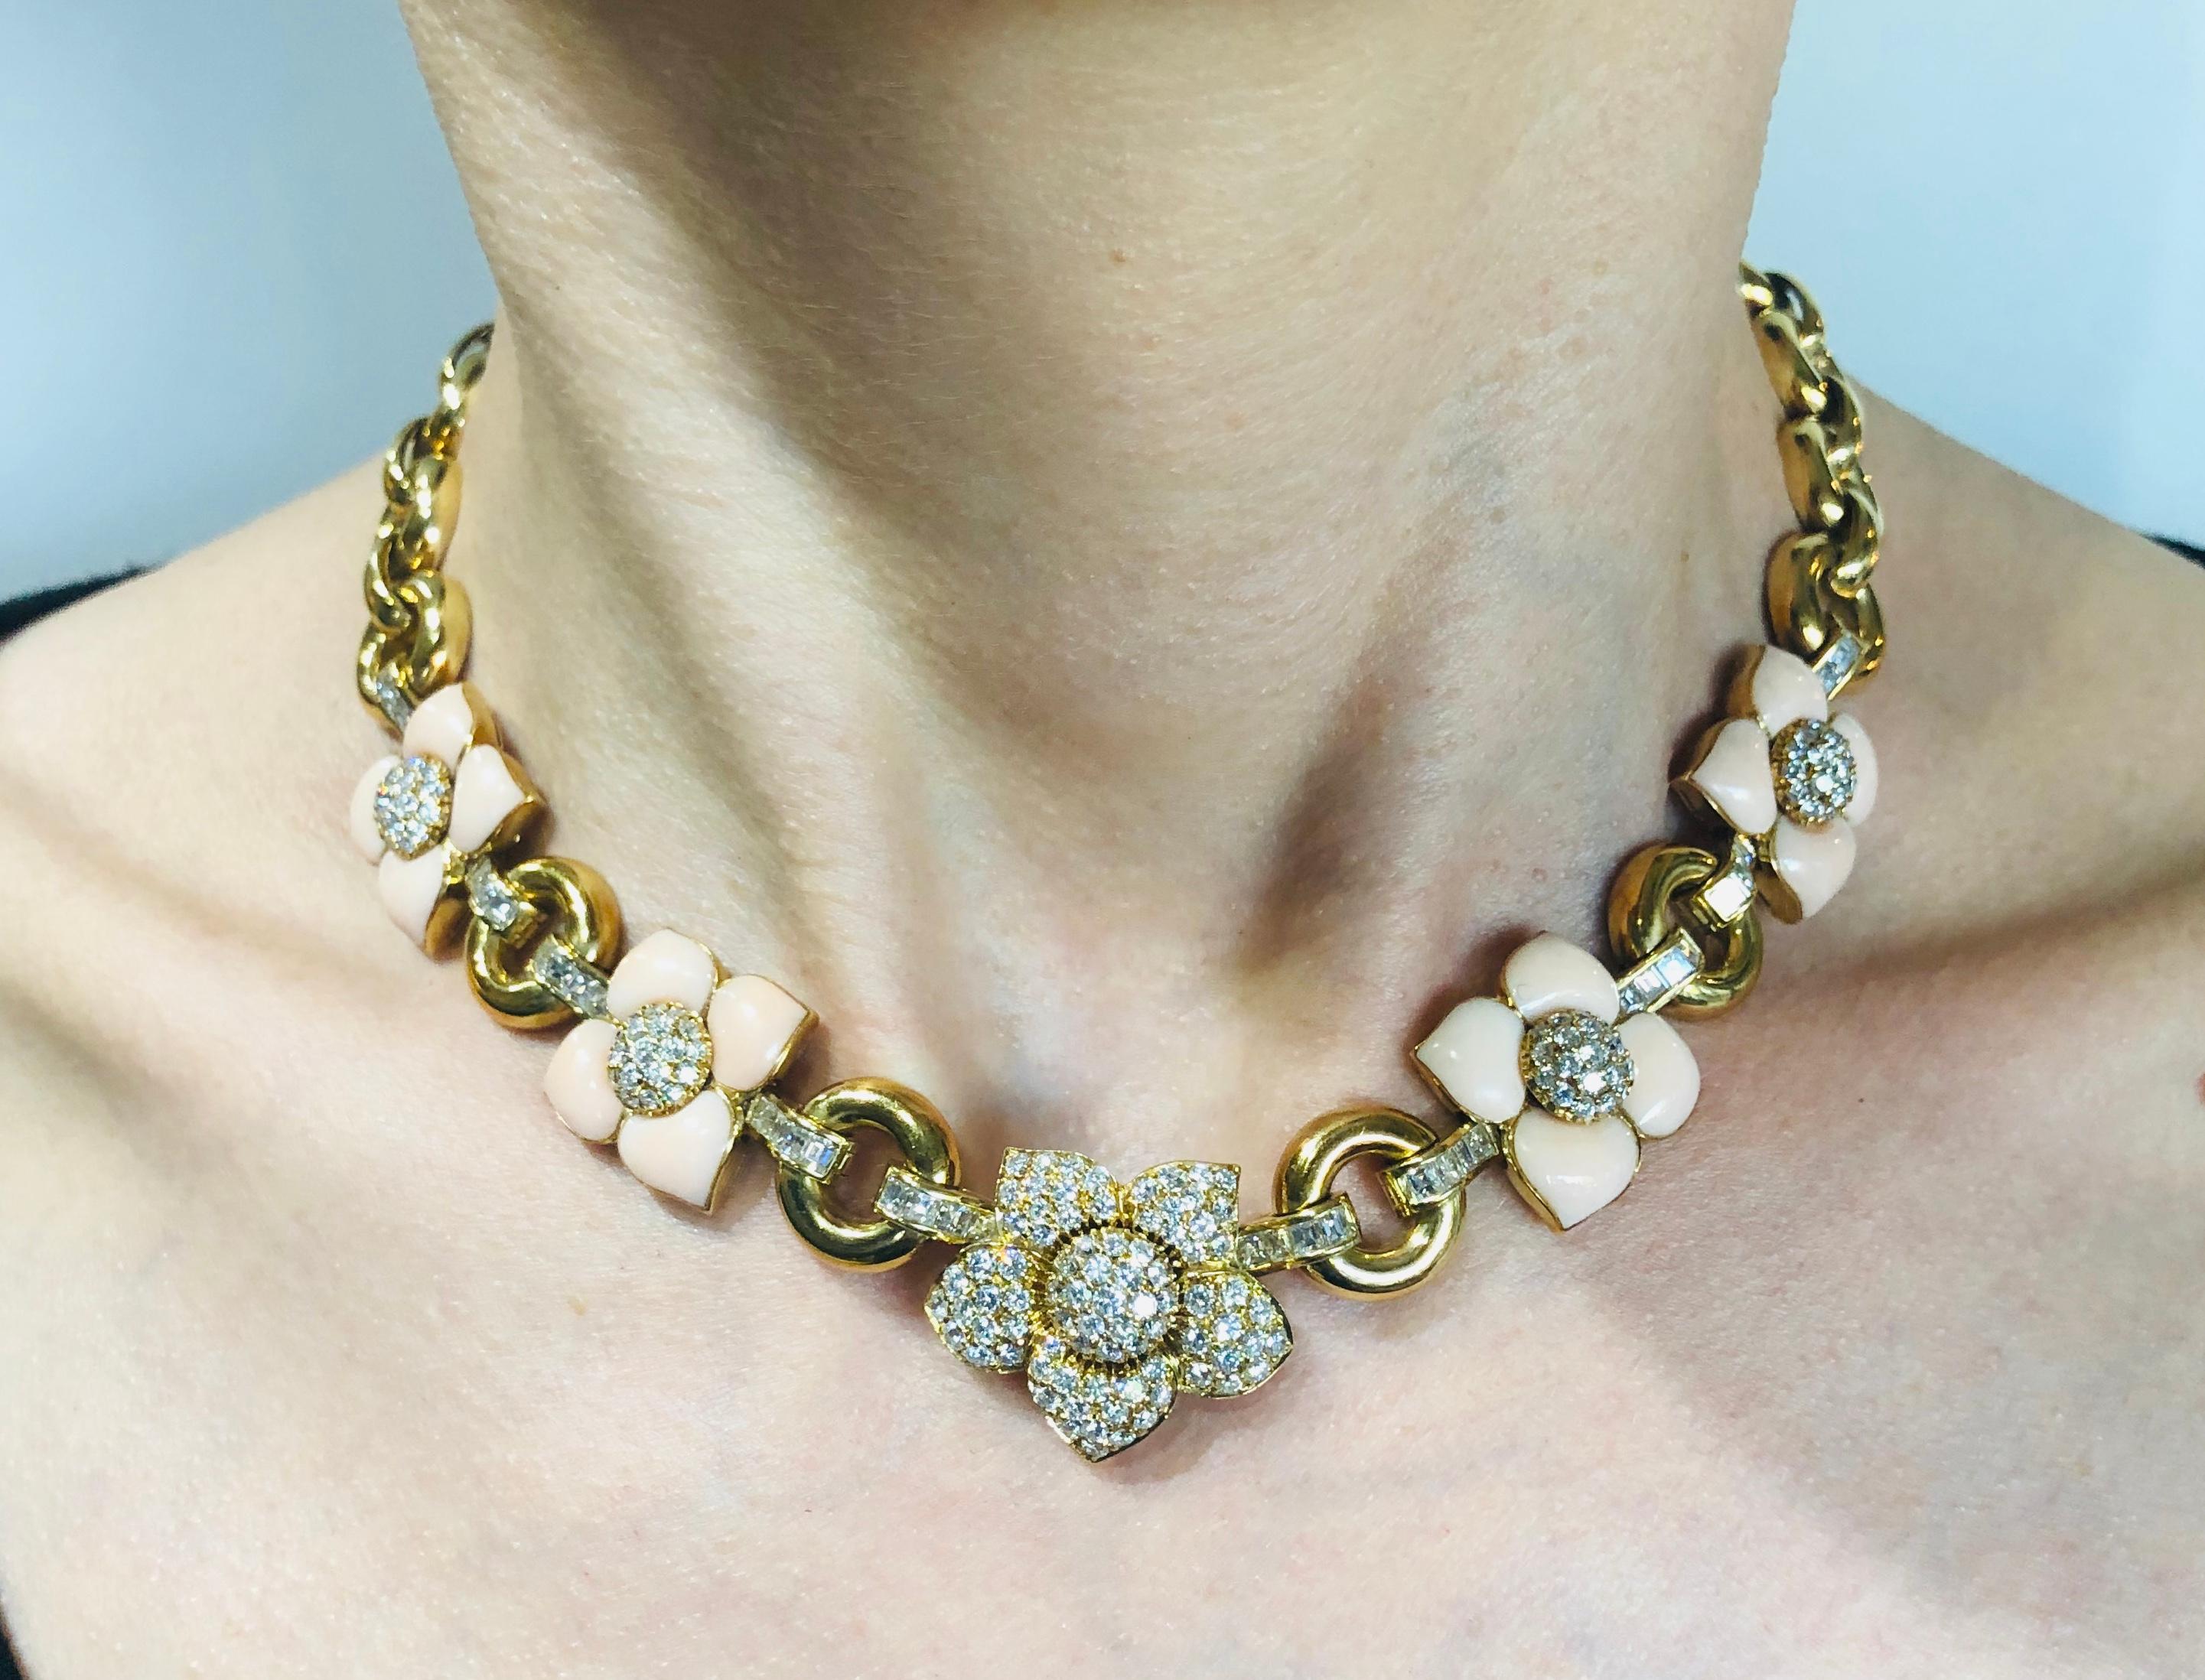 This Vintage Alhambra necklace is one of the most iconic Van Cleef & Arpels creations since 1968. Chic, elegant and timeless, the necklace is a great addition to your jewelry collection. 
What is special about this necklace is that it features four